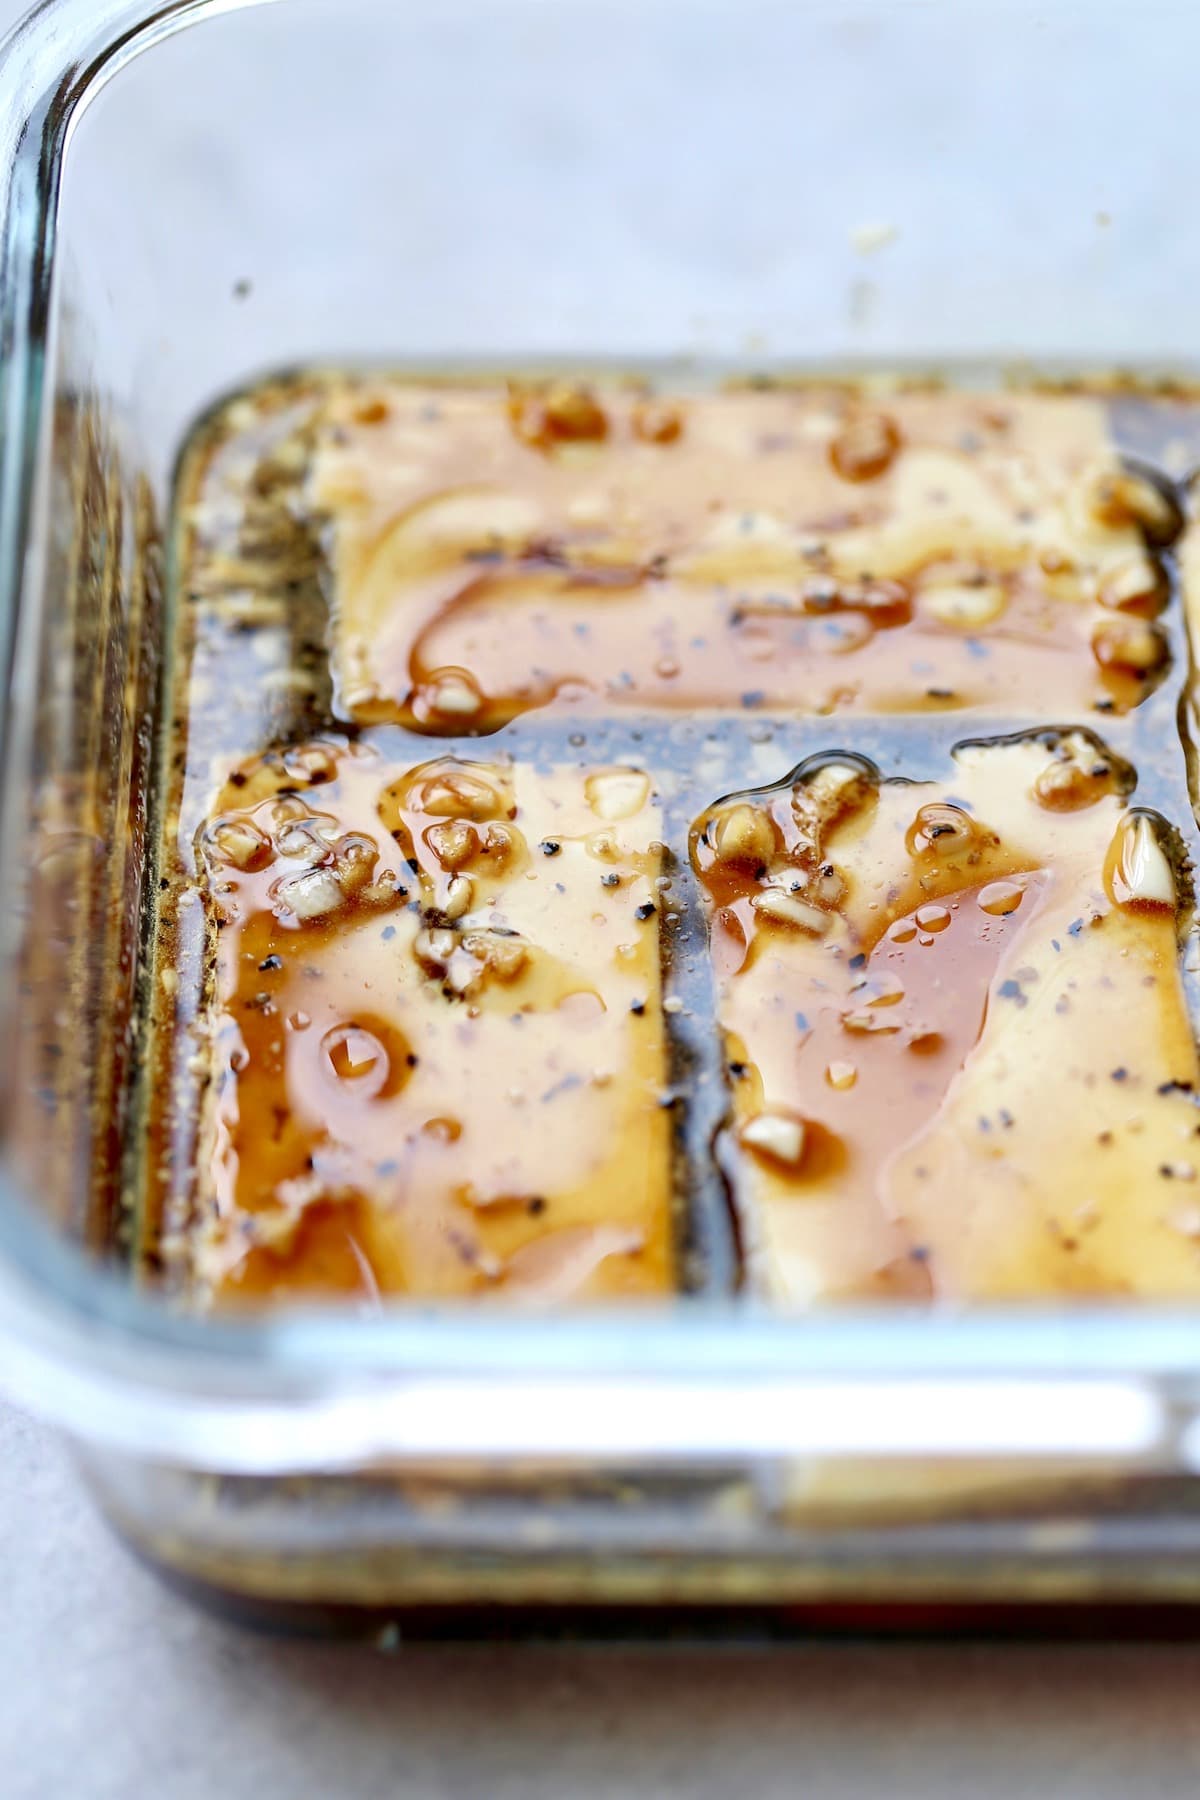 slices of tofu soaking in a simple marinade